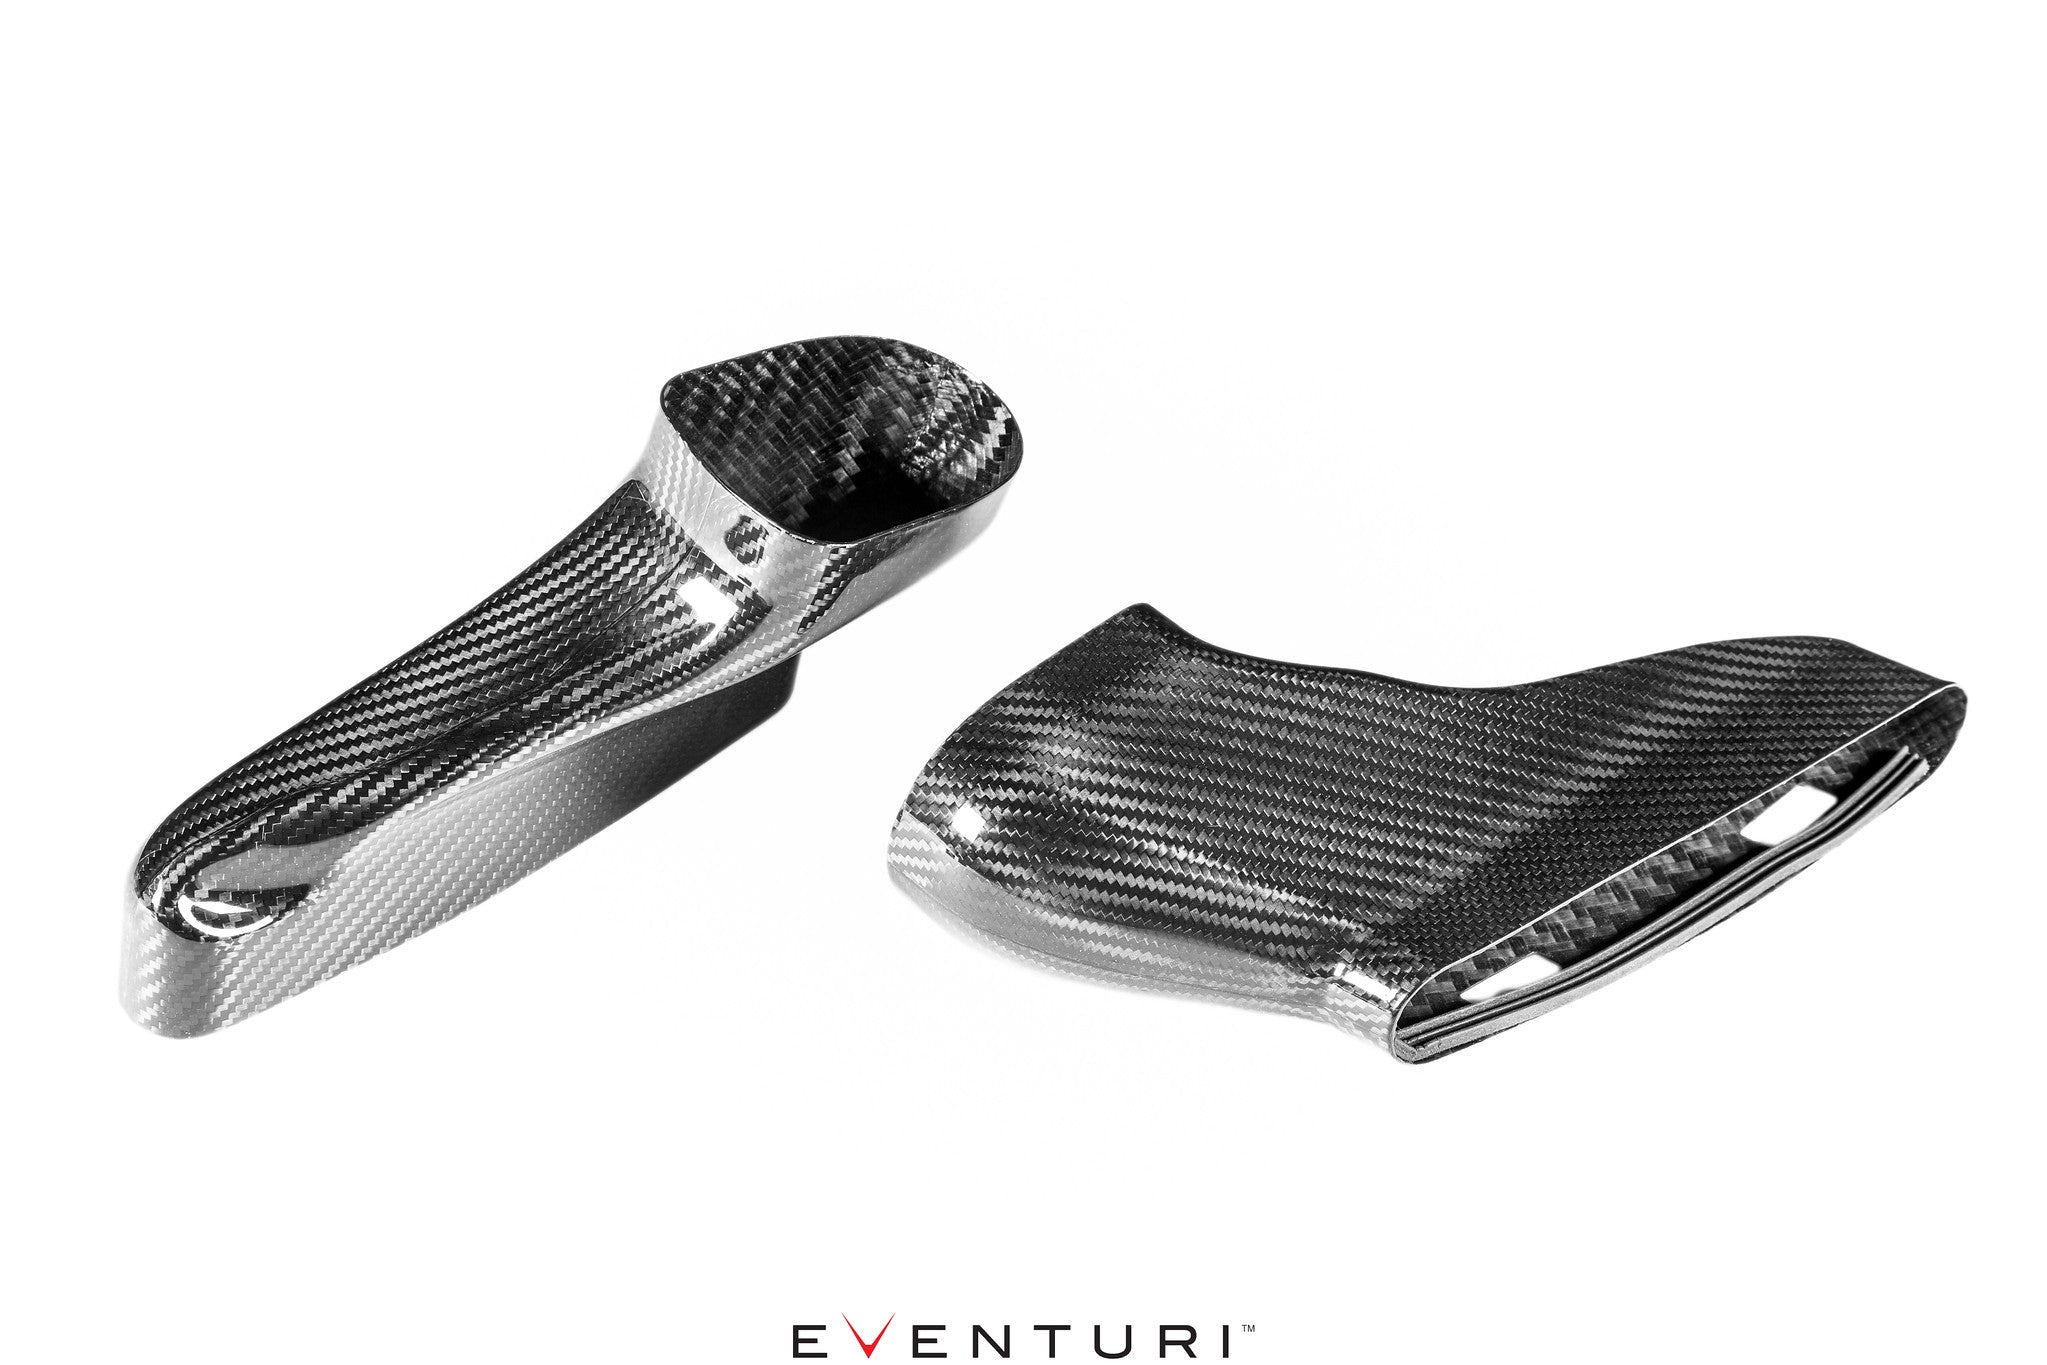 EVENTURI EVE-C63S-DCT Carbon Ducts for the EVE-C63S-CF-INT System (Ver. 1 with Rubber Tubes) Photo-1 